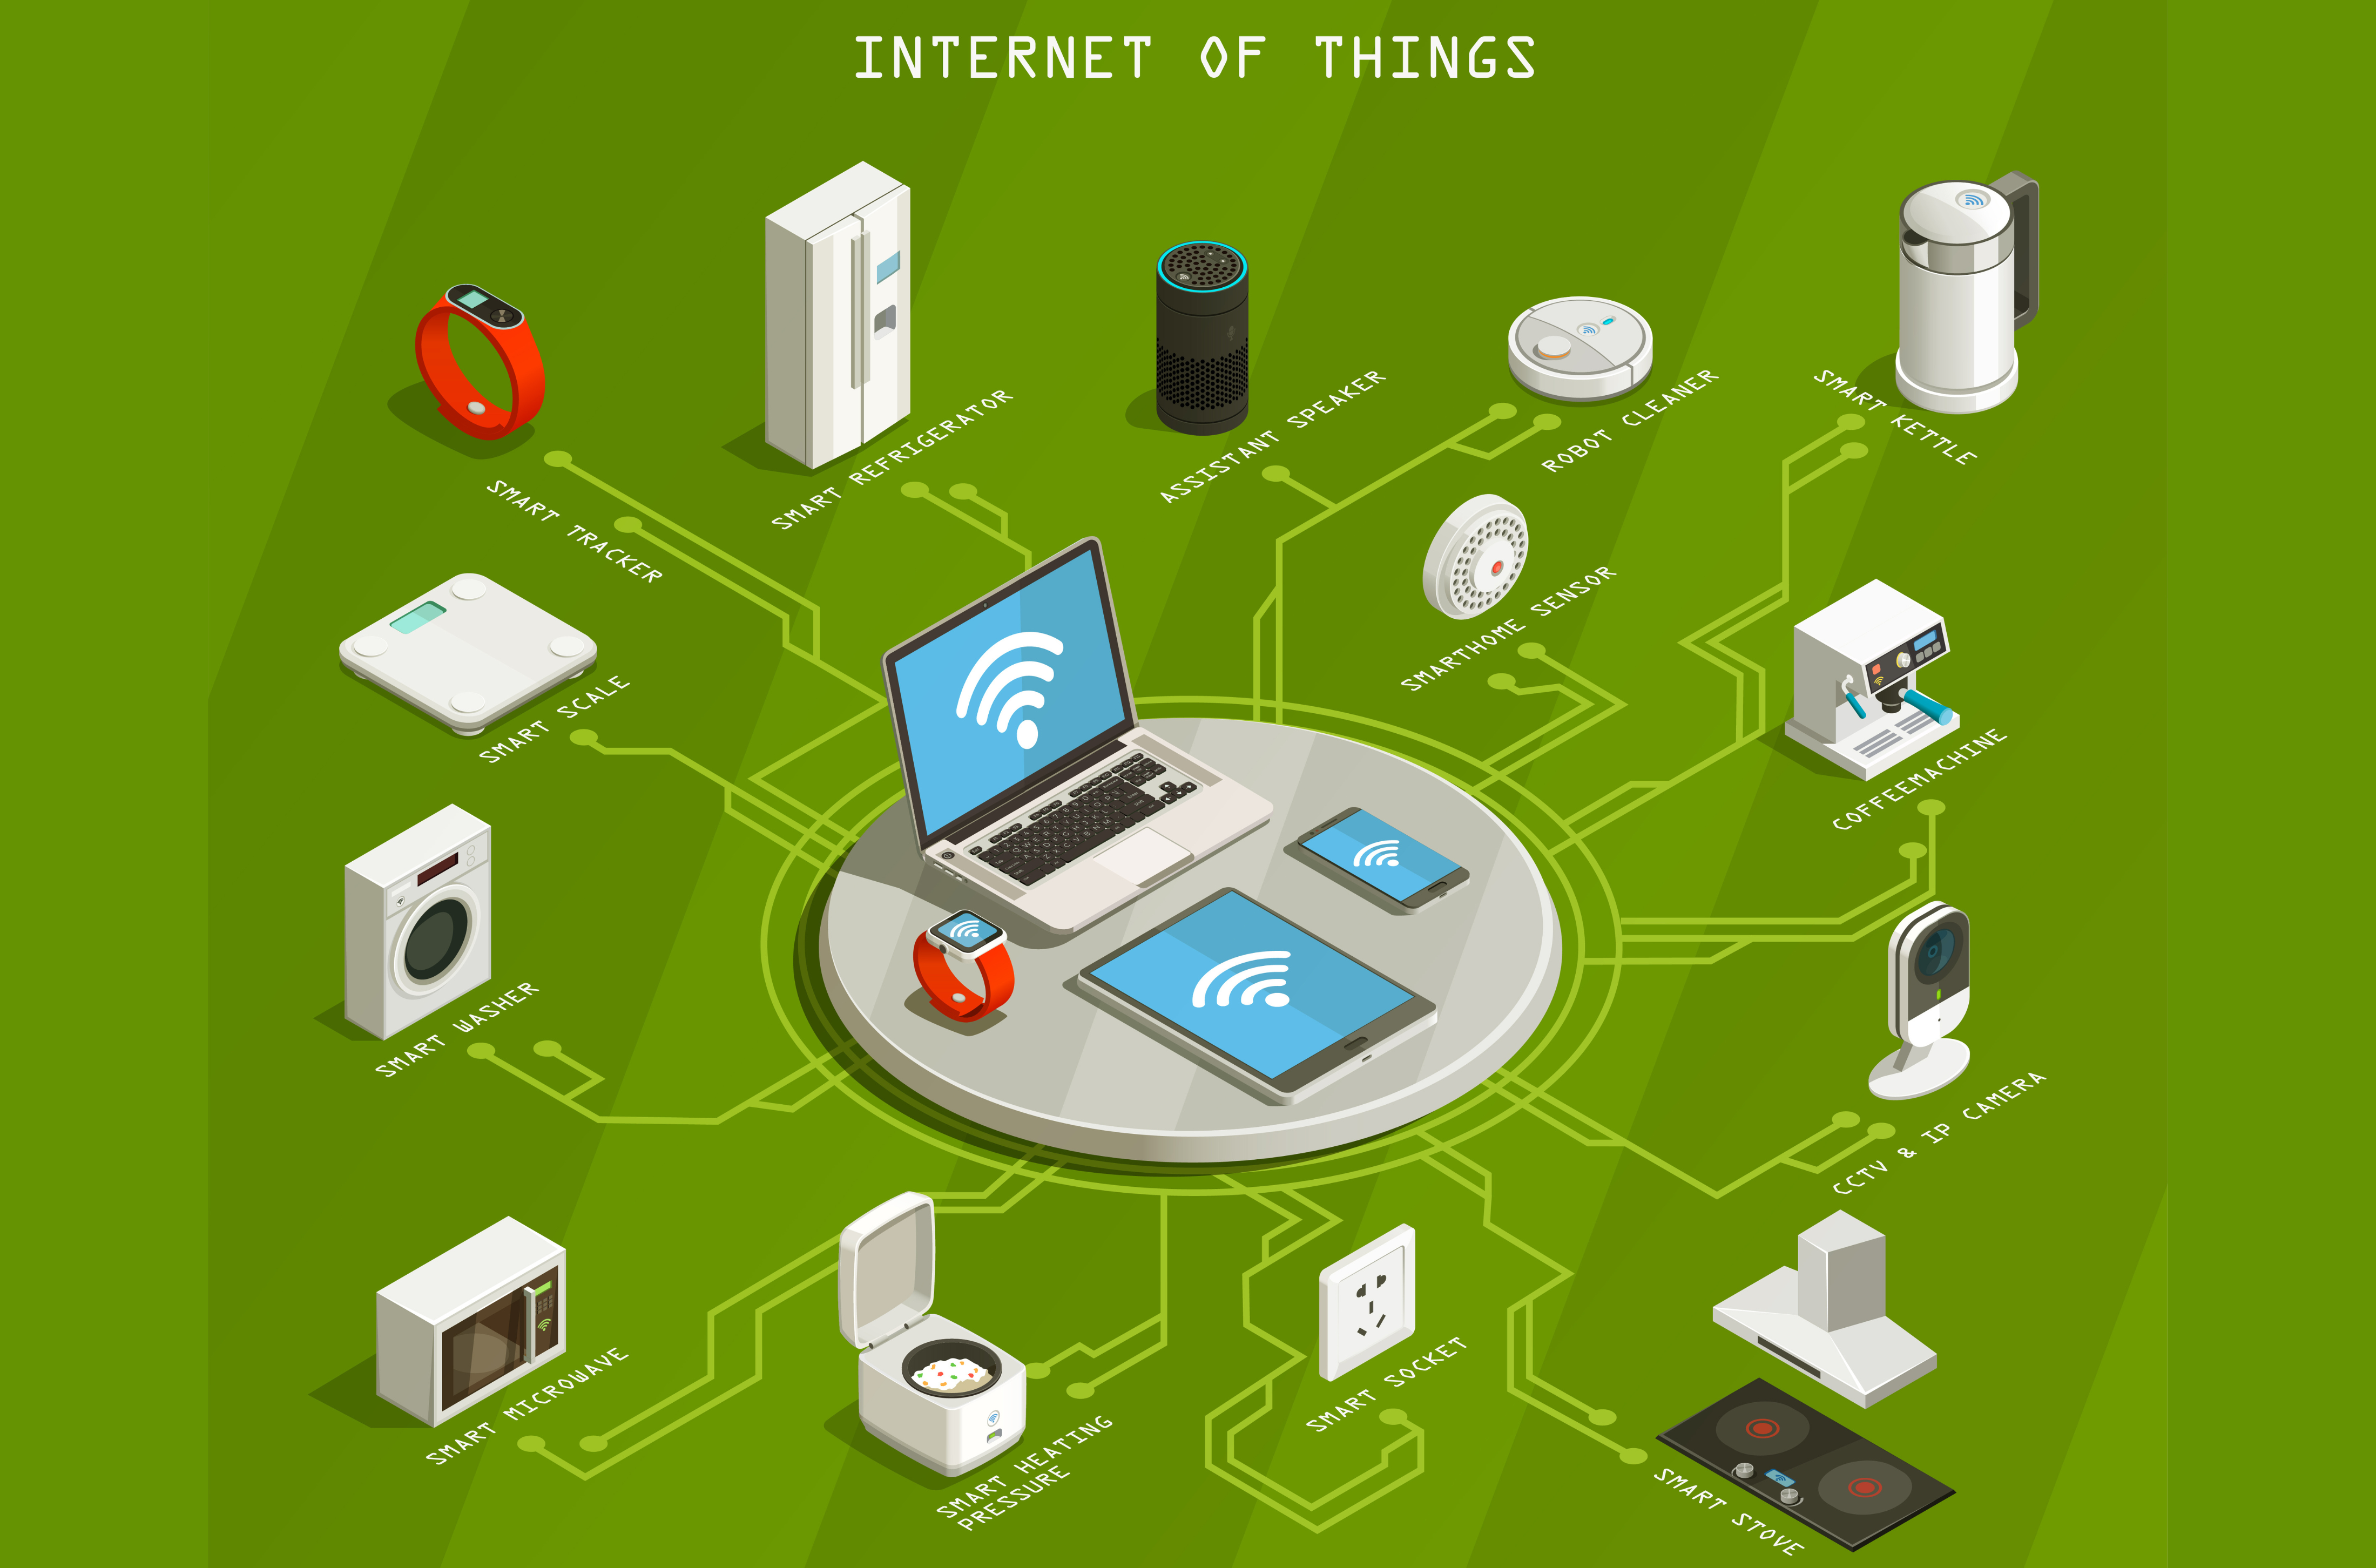 Common mistakes while implementing IoT